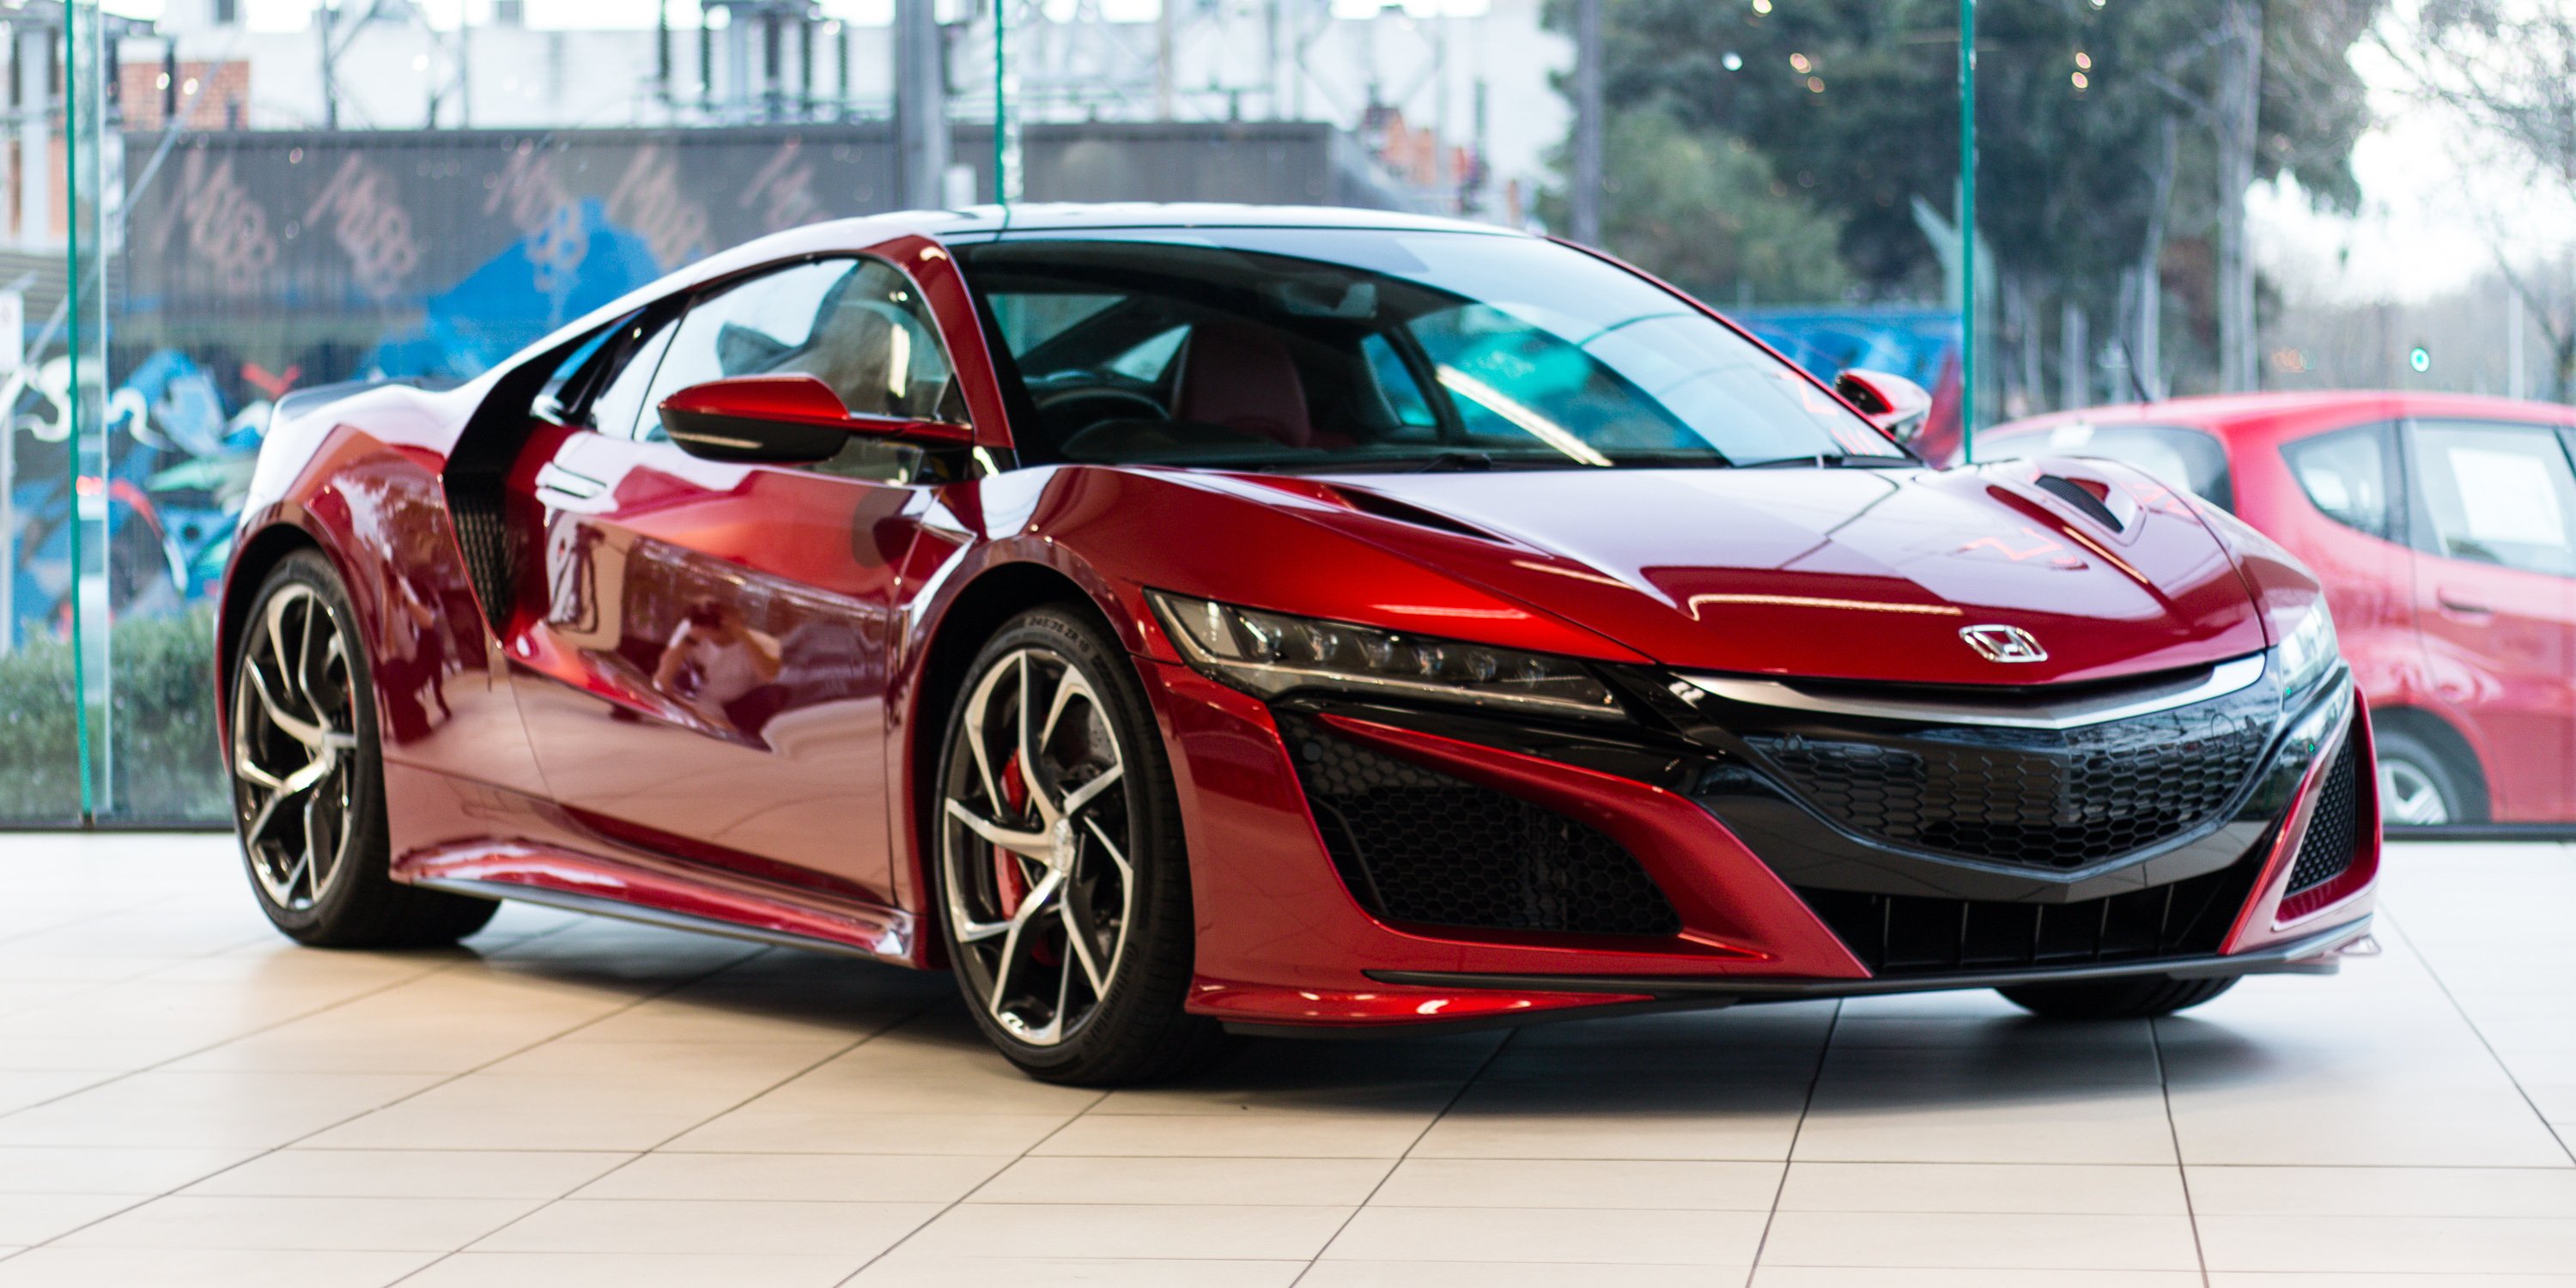 2017 Honda NSX 420,000 driveaway price tag tipped for